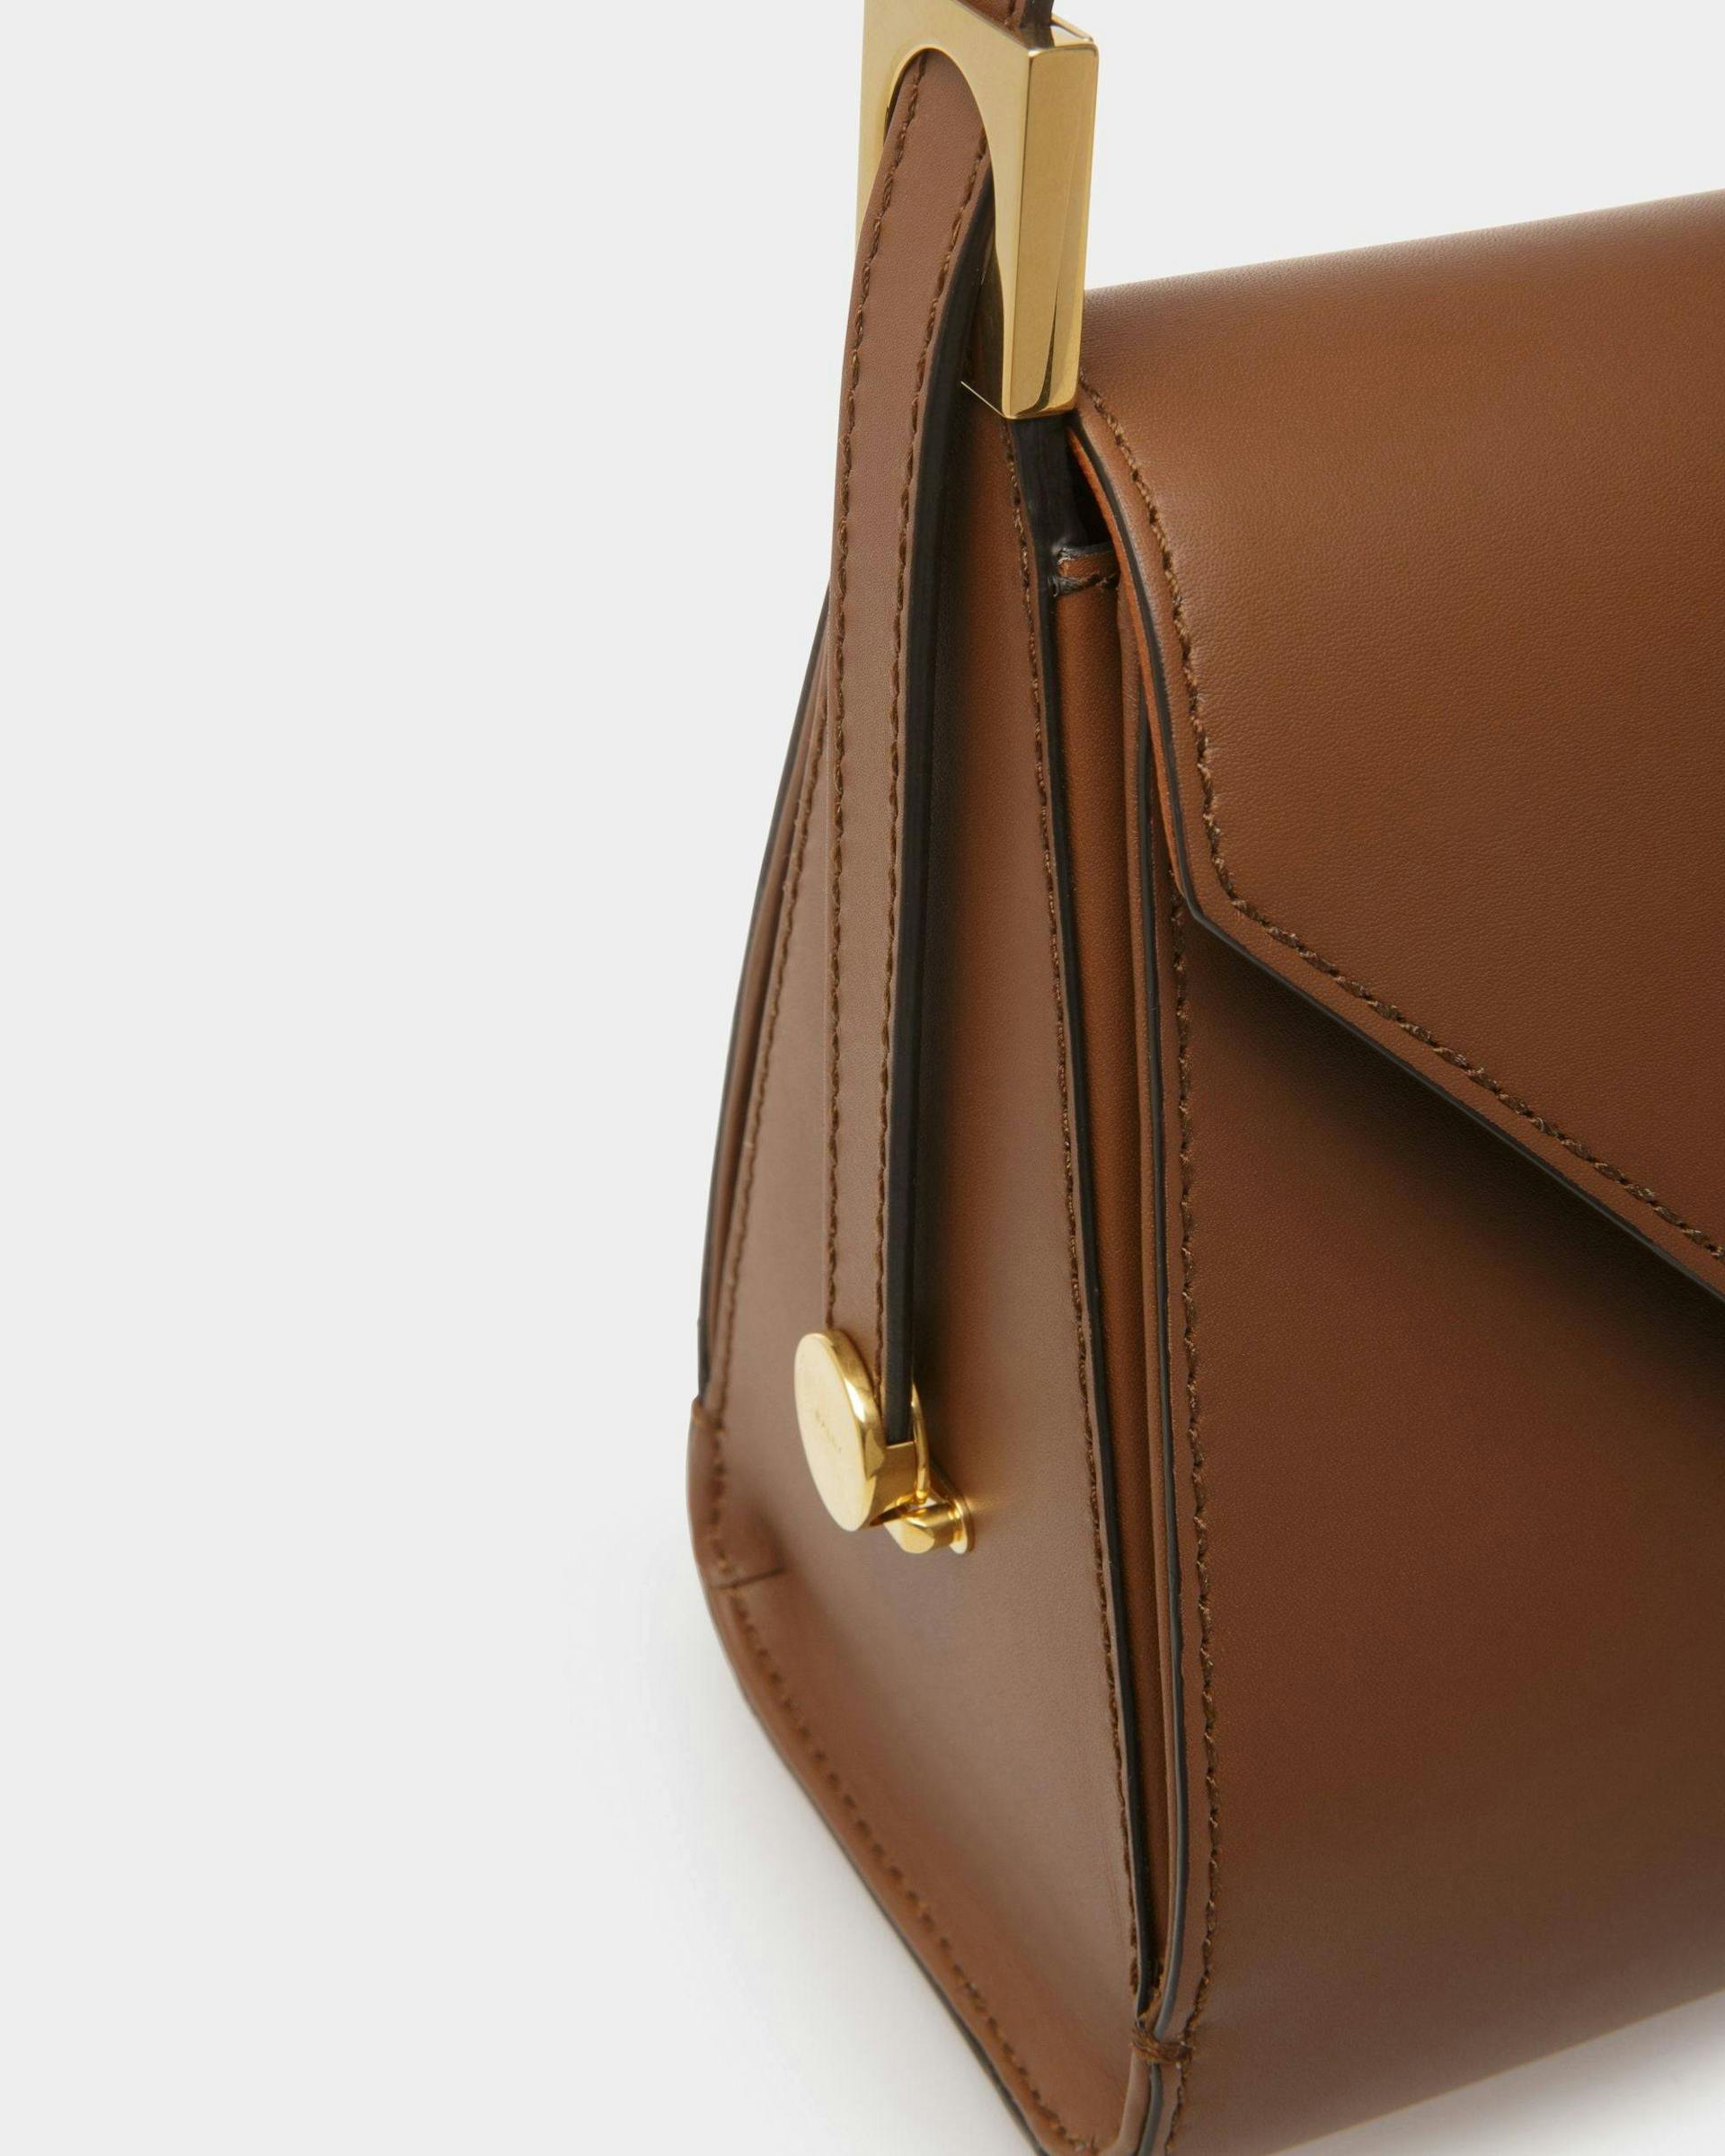 Women's Emblem Top Handle Bag In Brown Leather | Bally | Still Life Detail